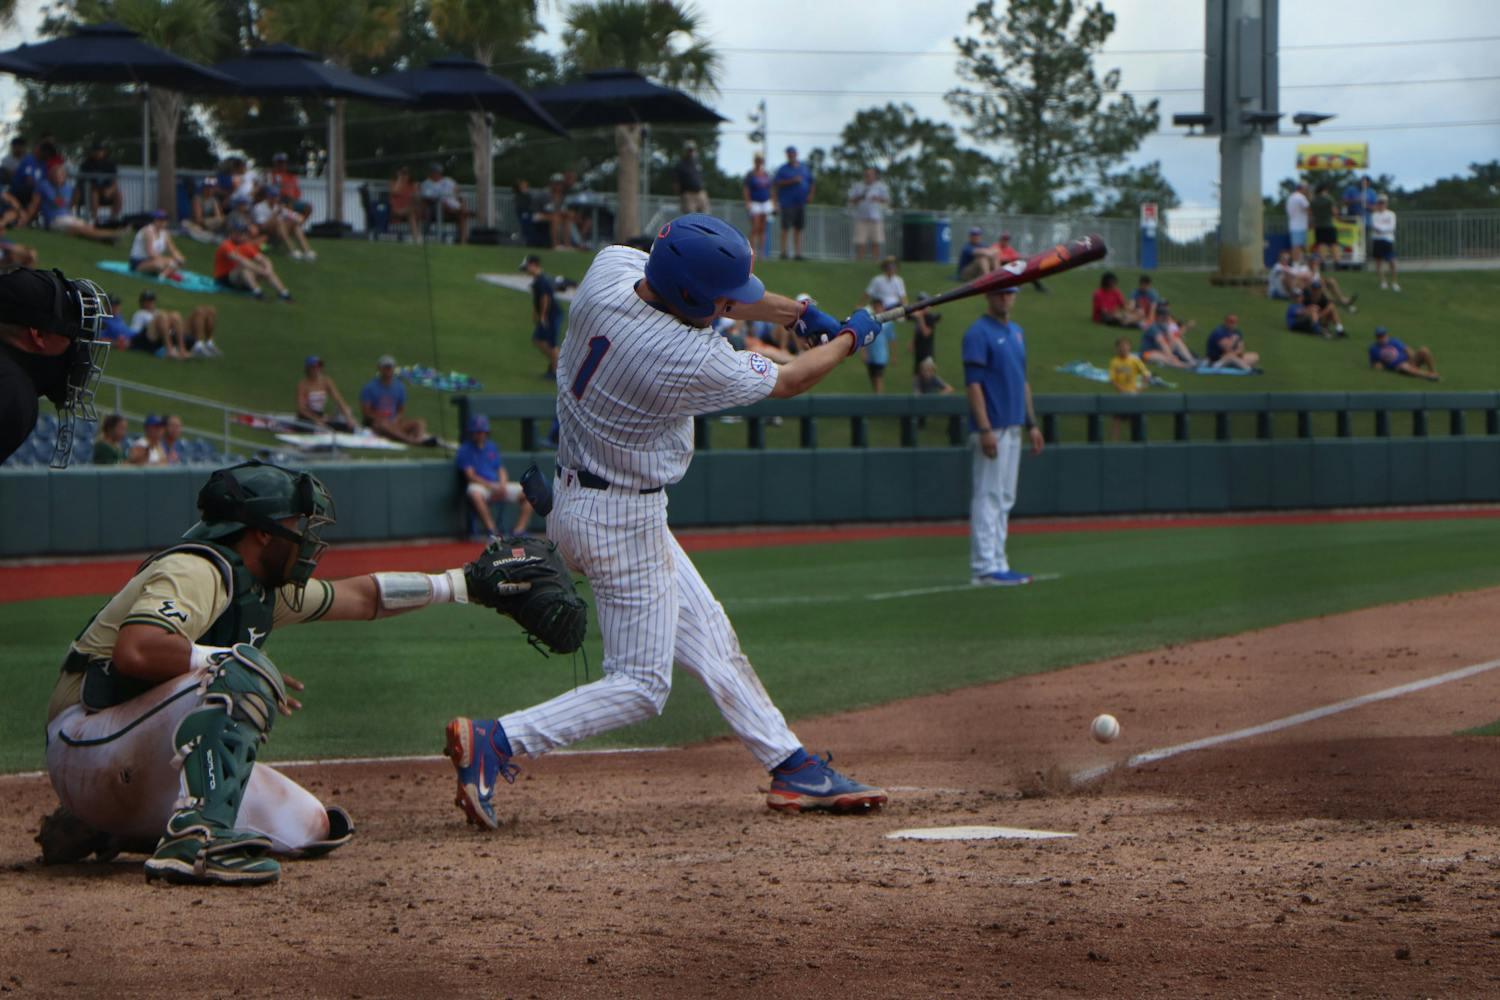 Jacob Young swings against USF. The Gators lost to the Bulls 5-3 Friday.